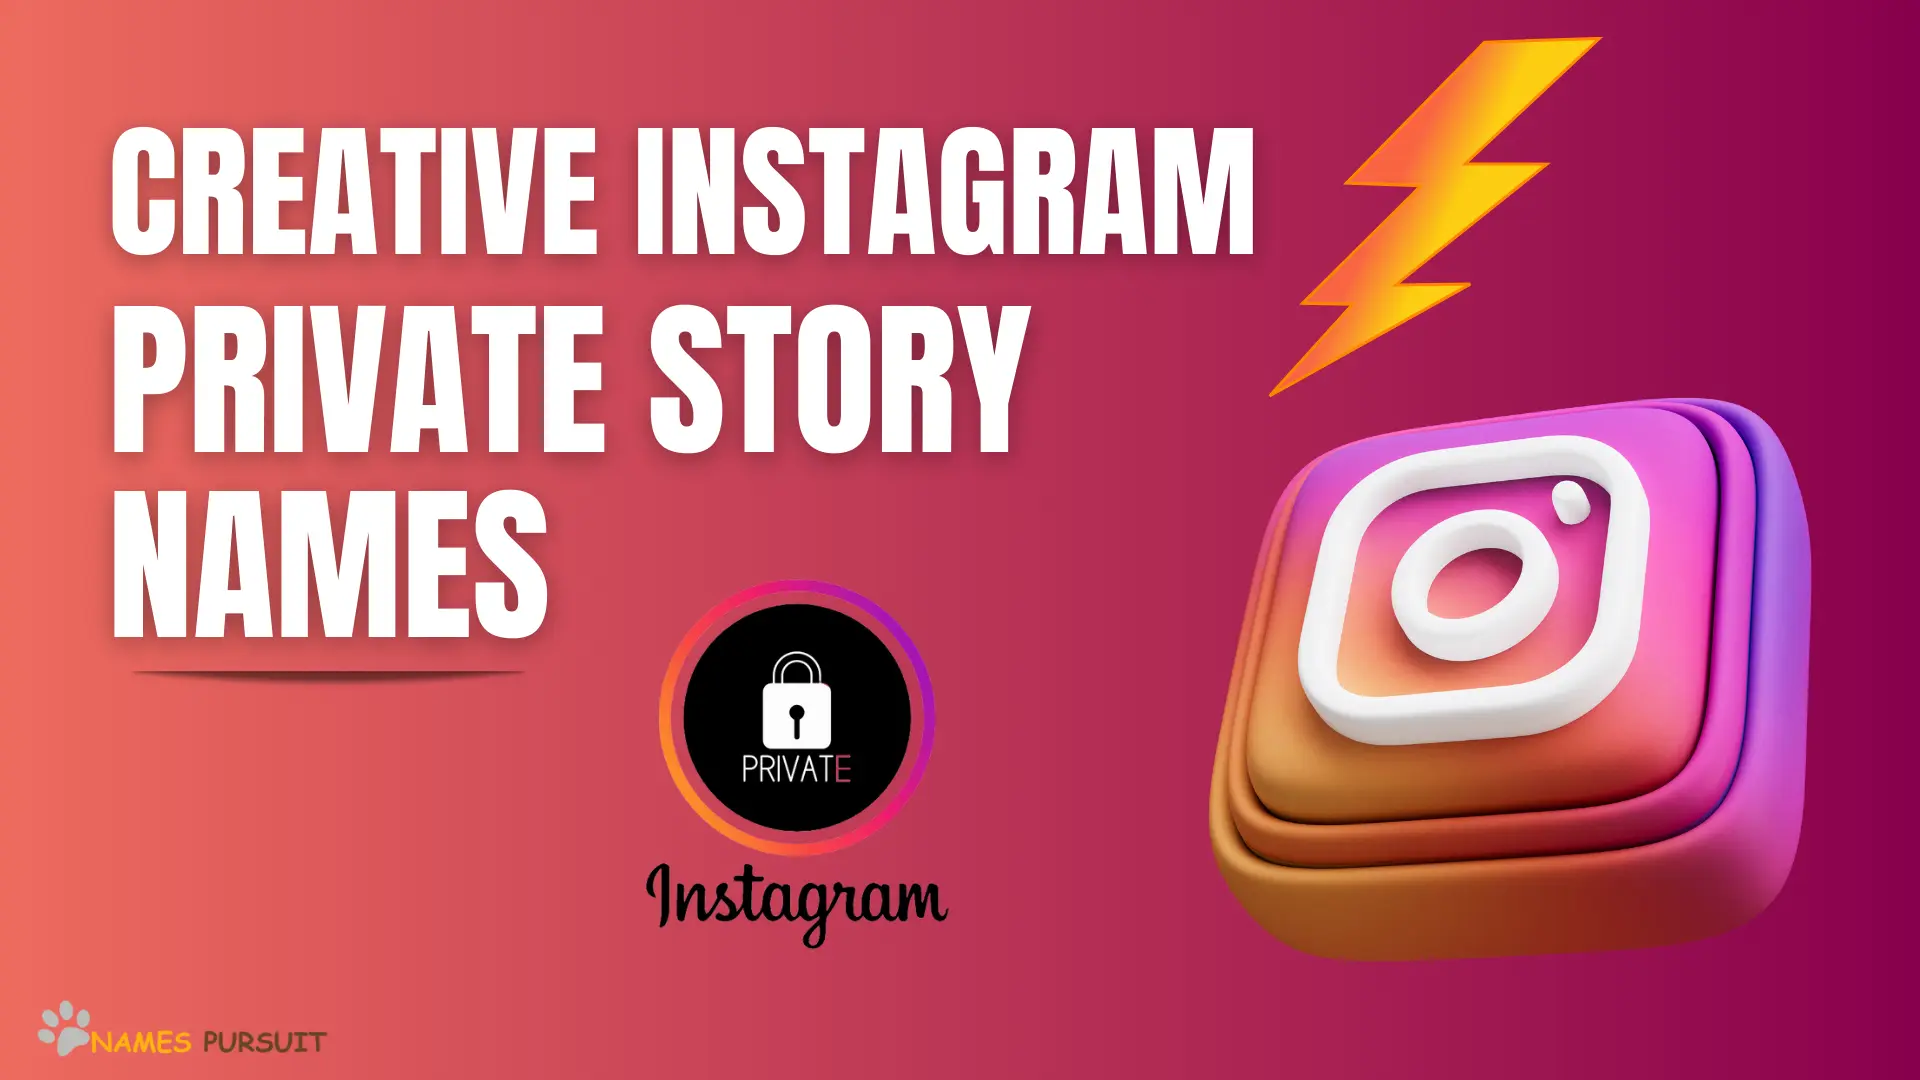 Creative Instagram Private Story Names